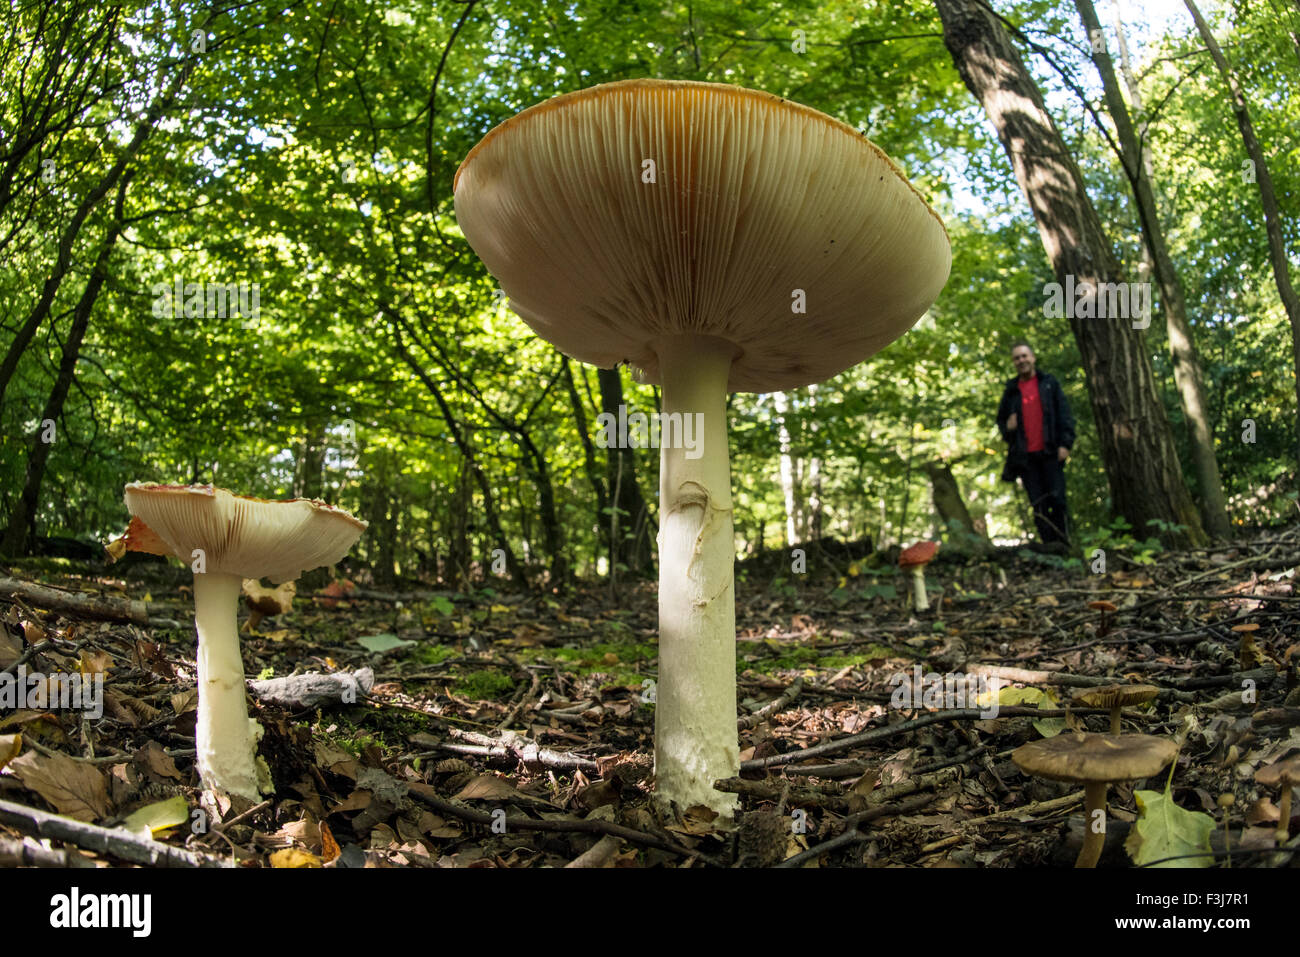 Common funnel (Clitocybe gibba) fungi close up with man in the background in Epping Forest, England, Great Britain, United Kingd Stock Photo